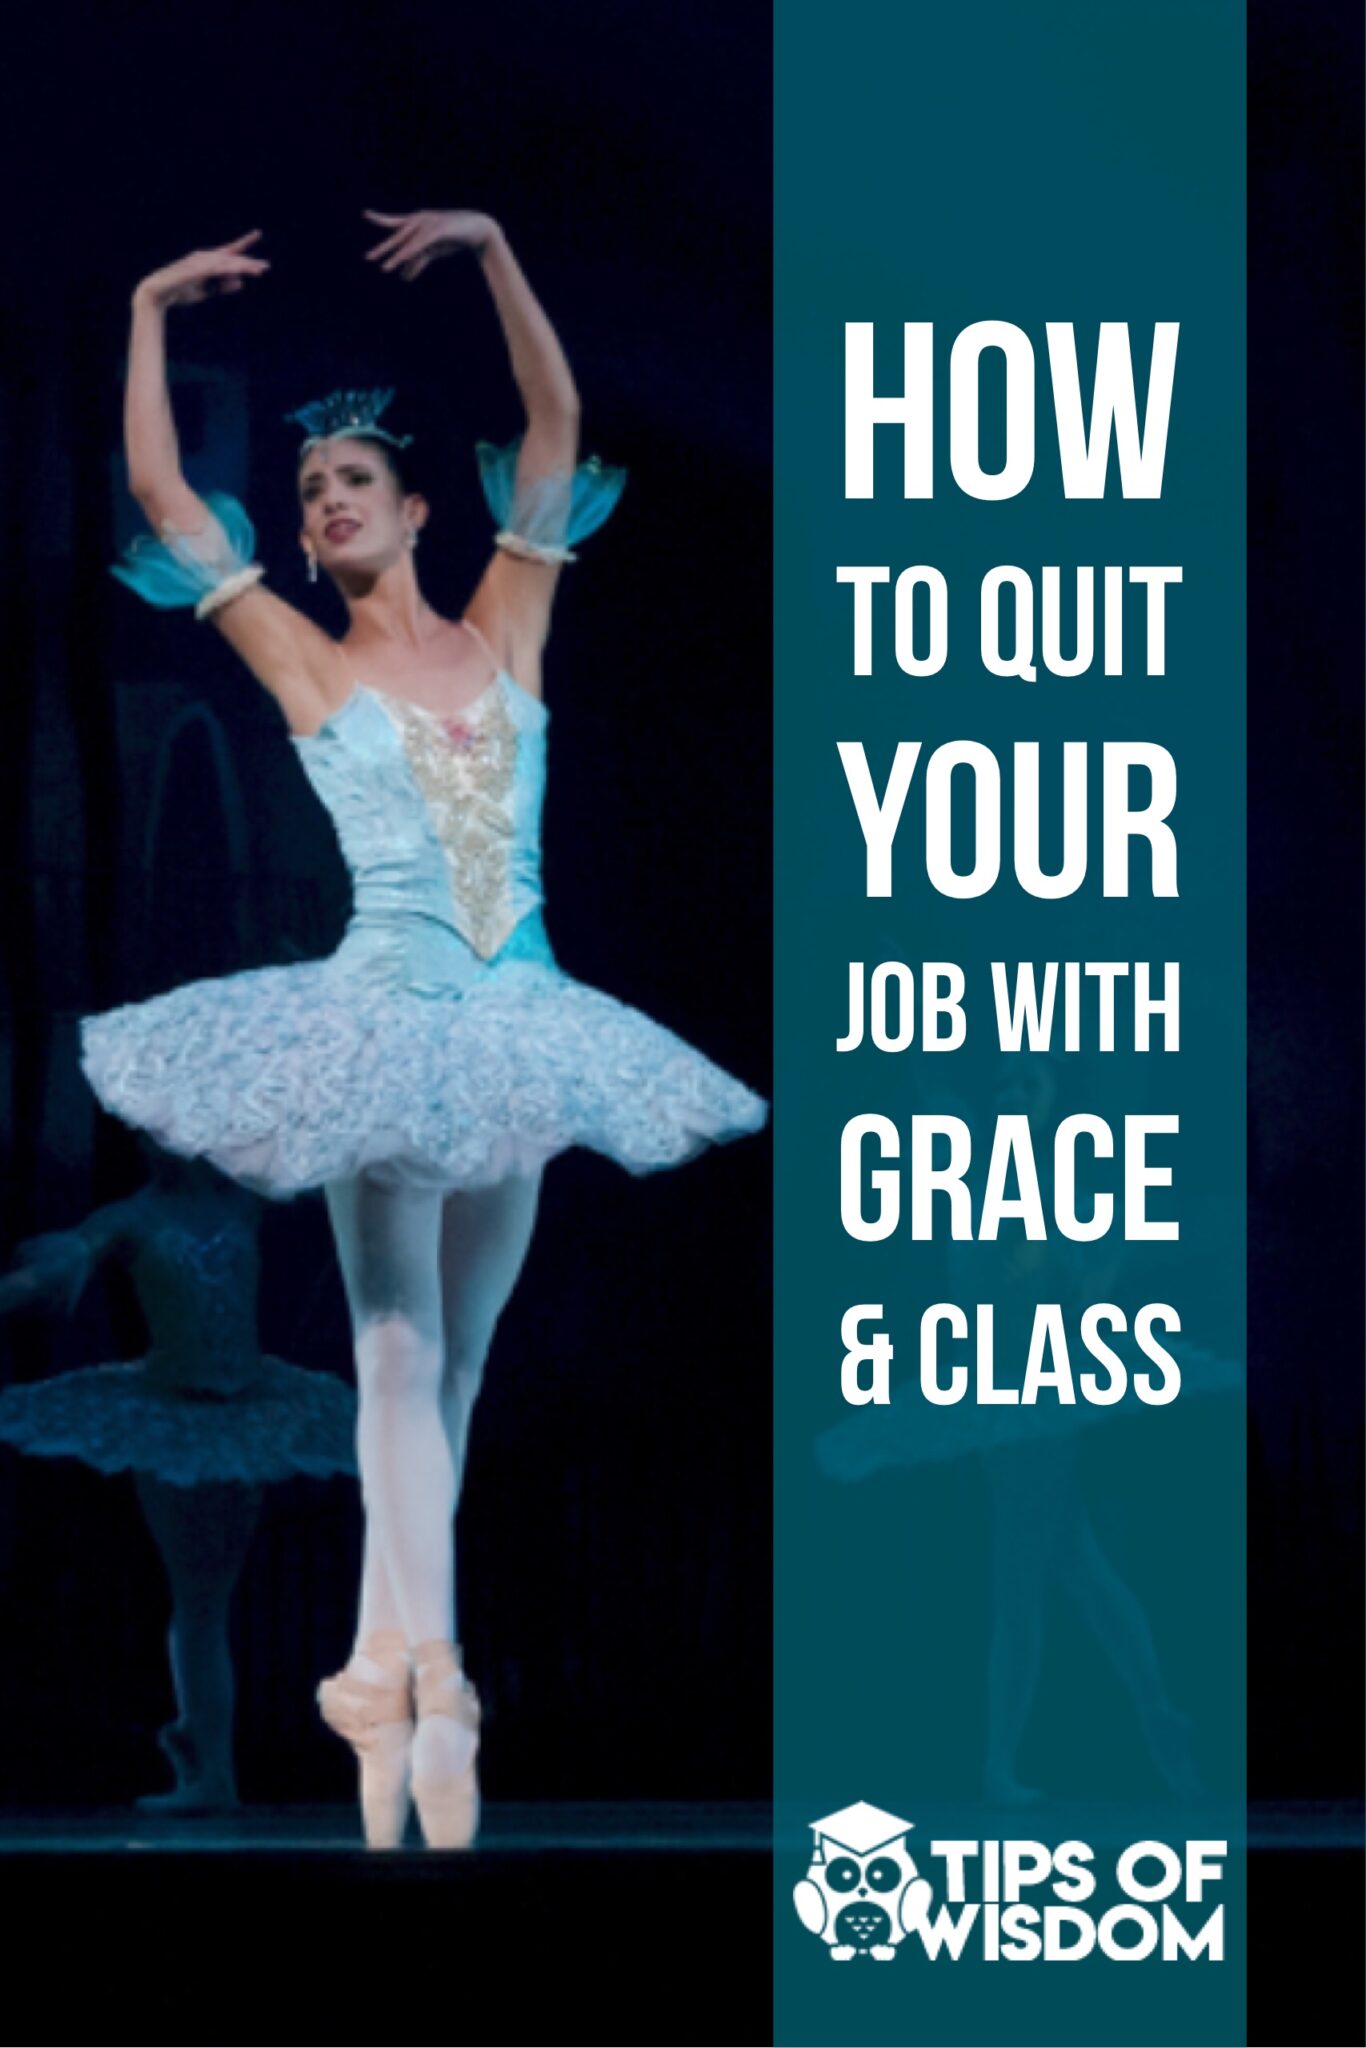 How to Quit Your Job with Grace & Class. Tips for giving your 2 weeks notice gracefully.